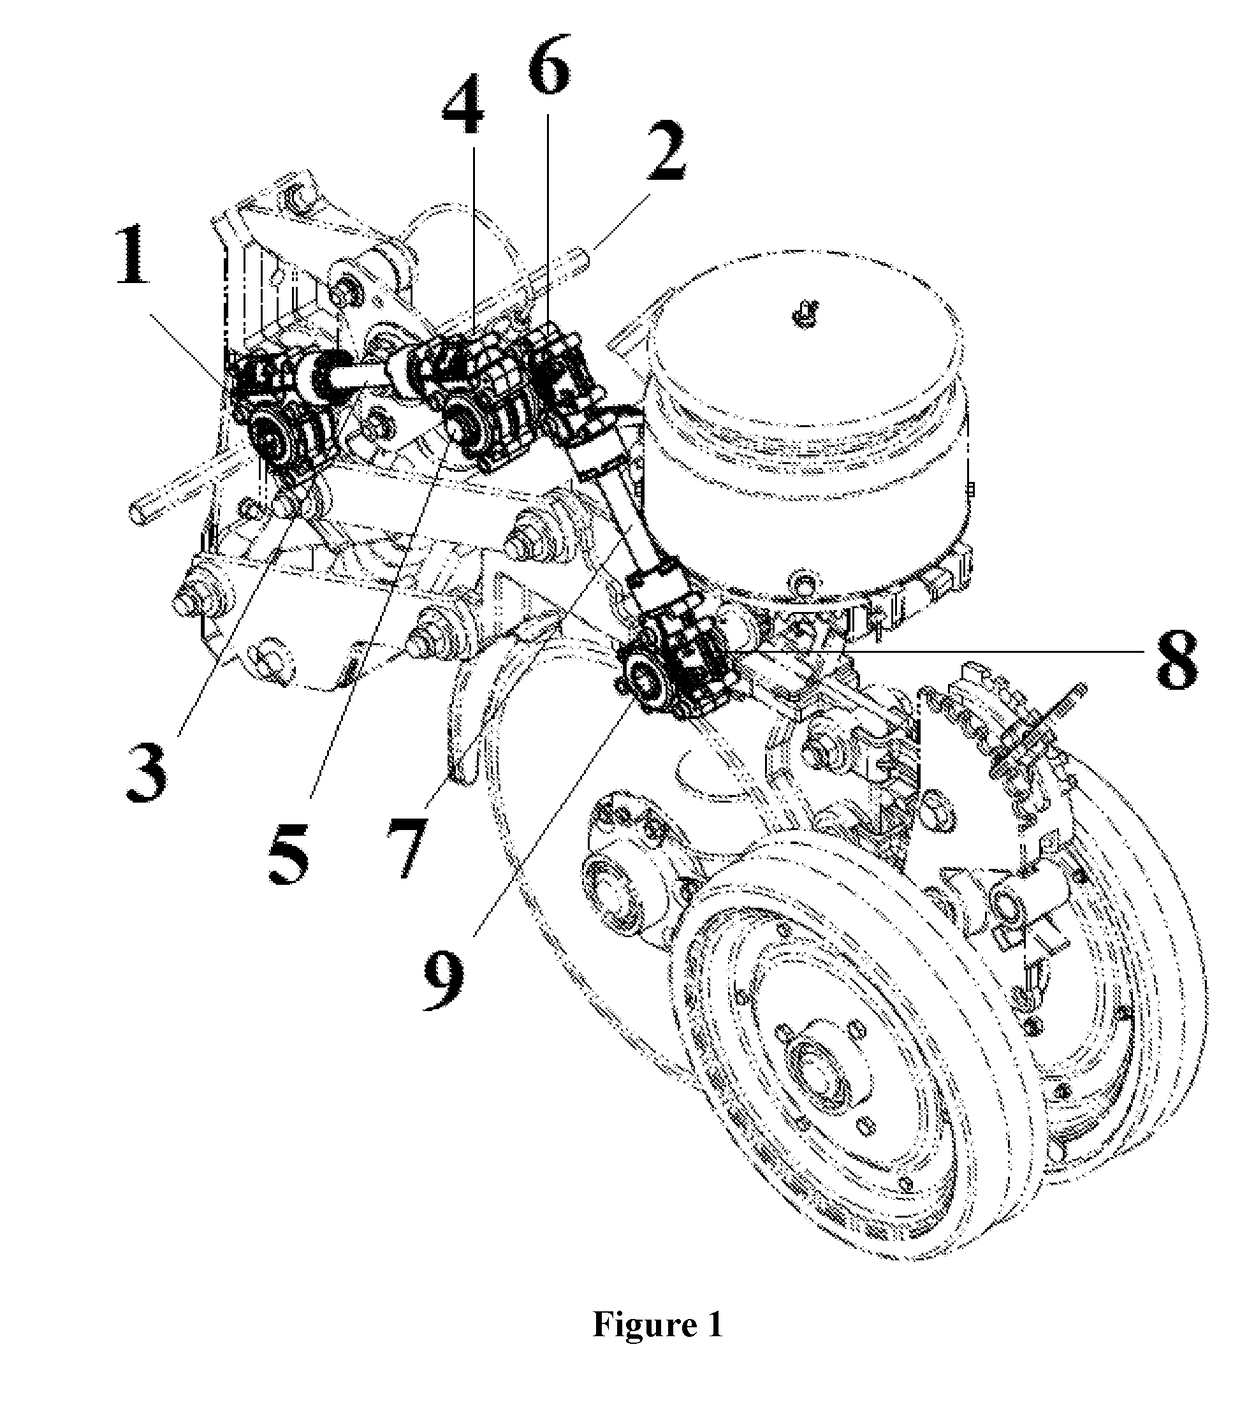 Flexible transmission system for use in agricultural machines and tools in general